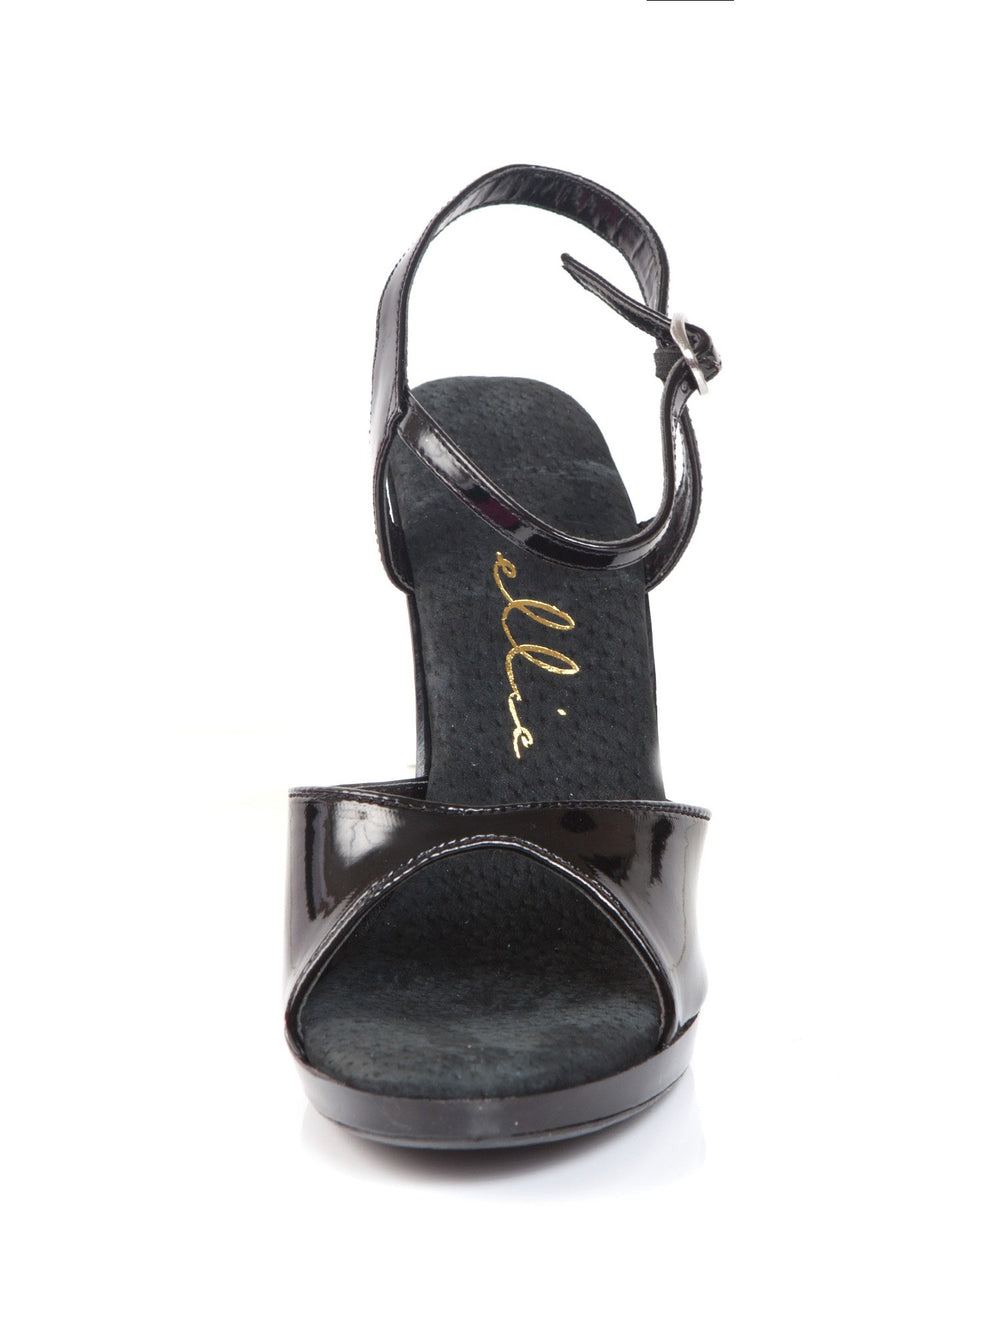 Jania Open Toe 3 Inch Sandals - Honour Clothing